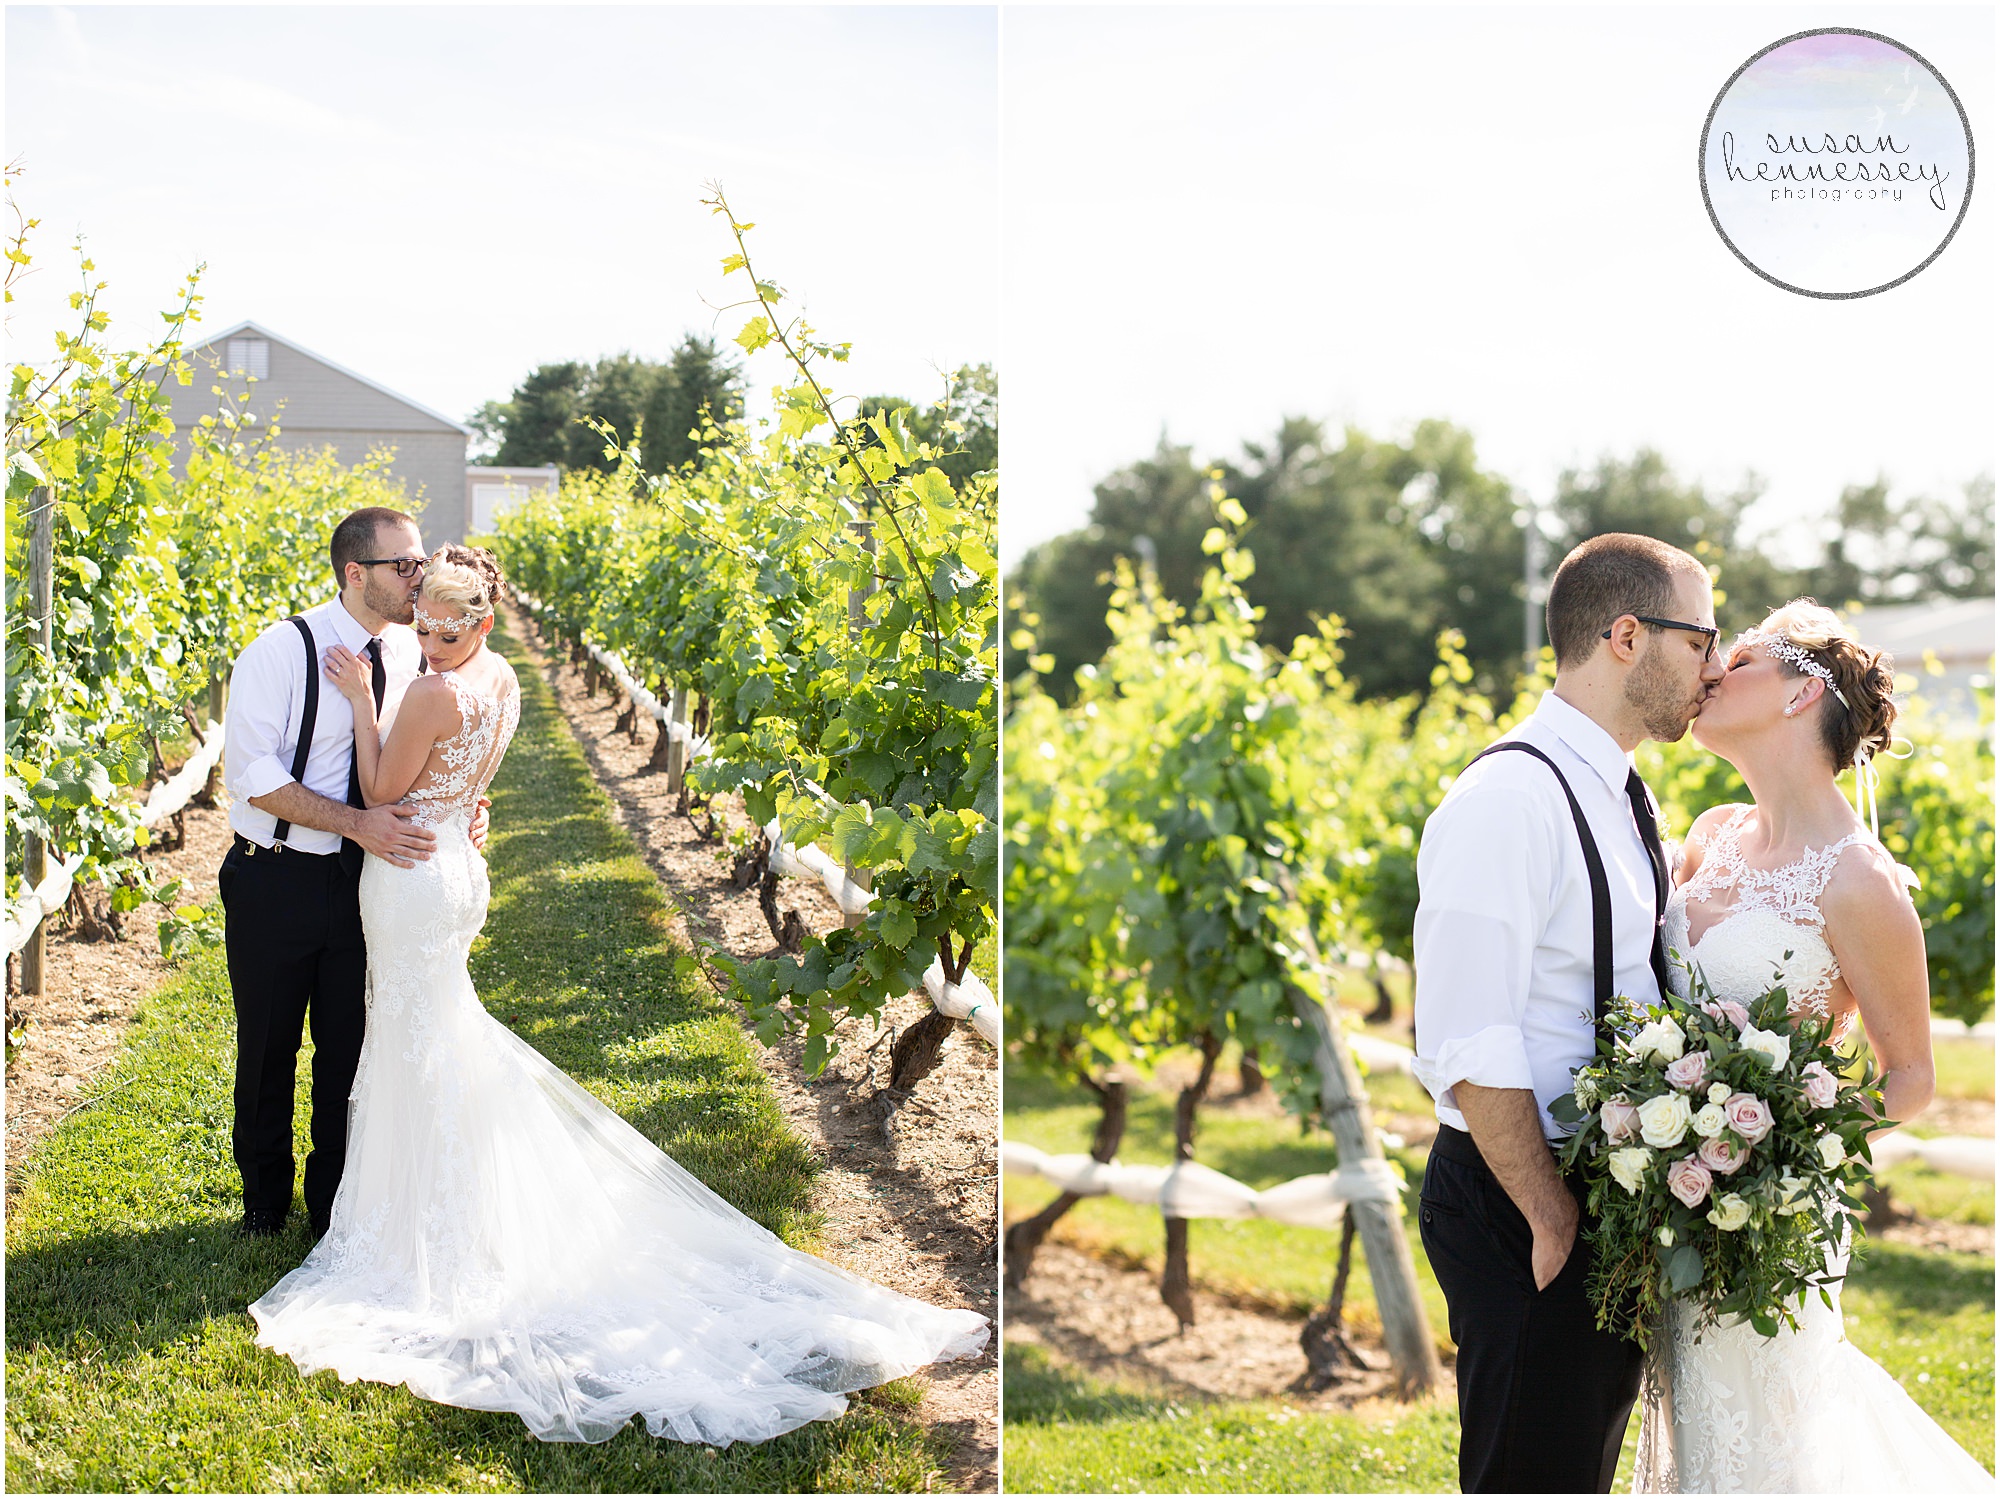 Bride and groom kiss on their wedding day at a winery